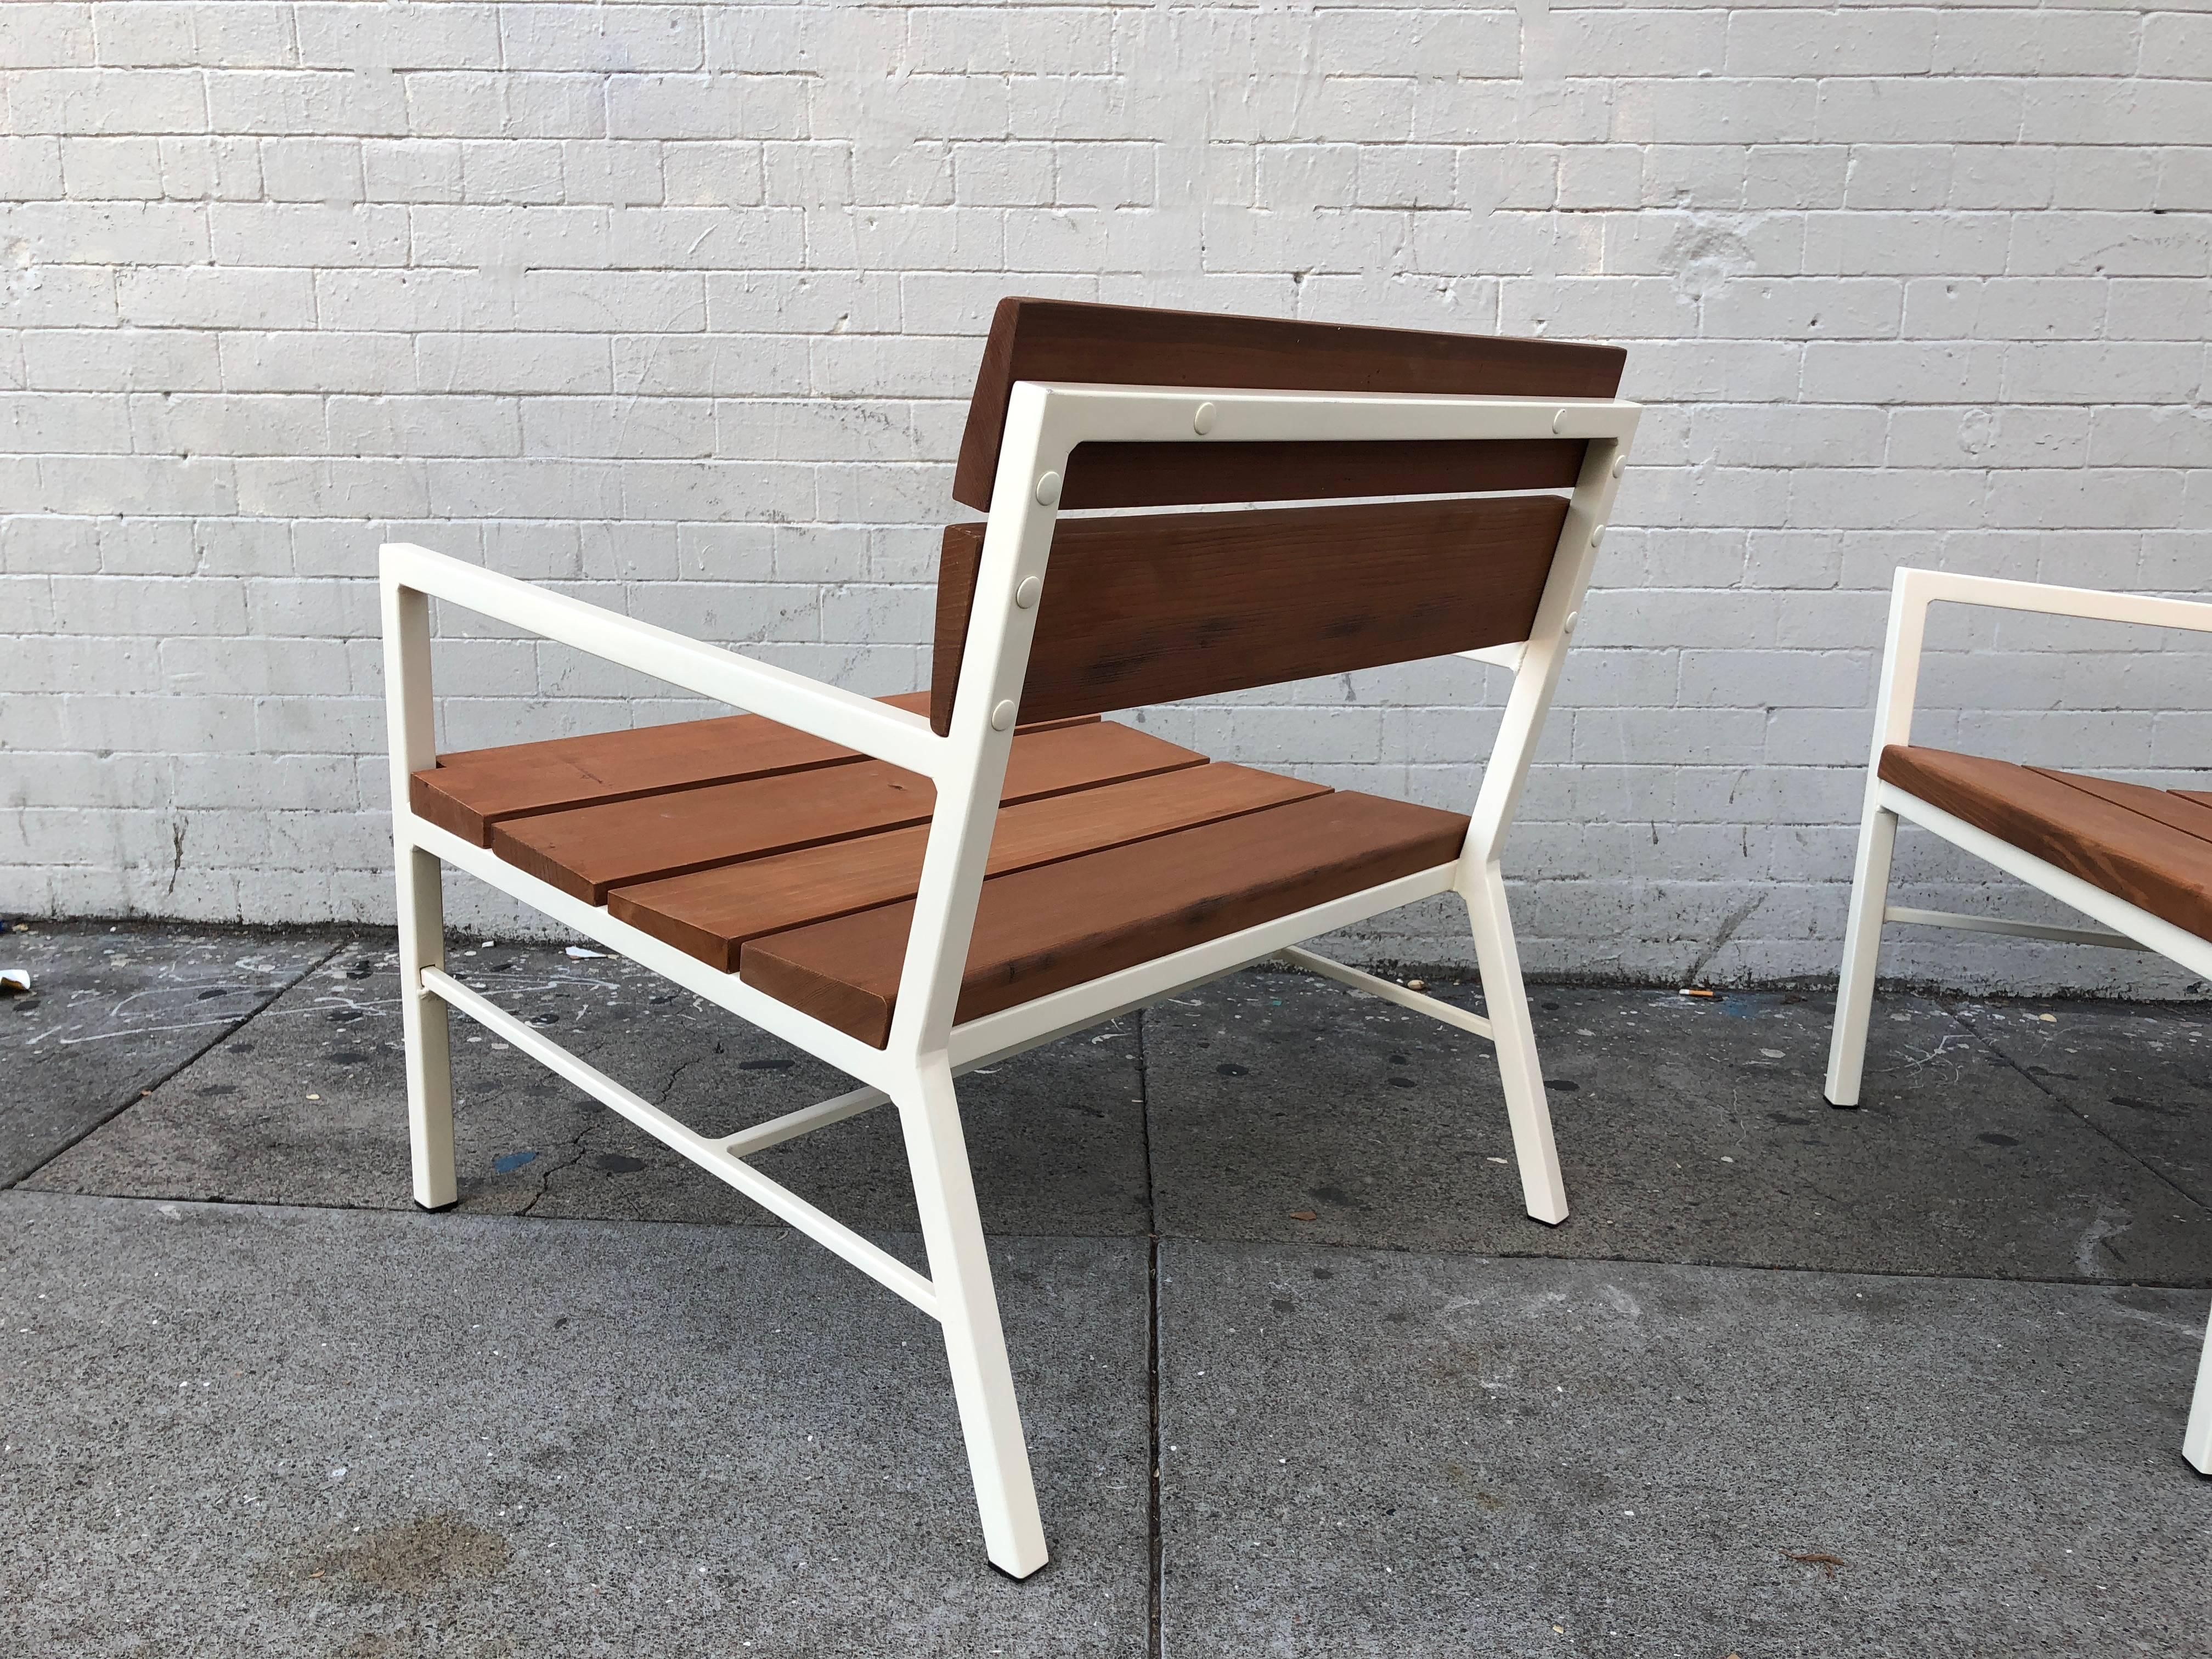 Van Keppel and Green Redwood Lounge Chairs, circa 1960s, California For Sale 2